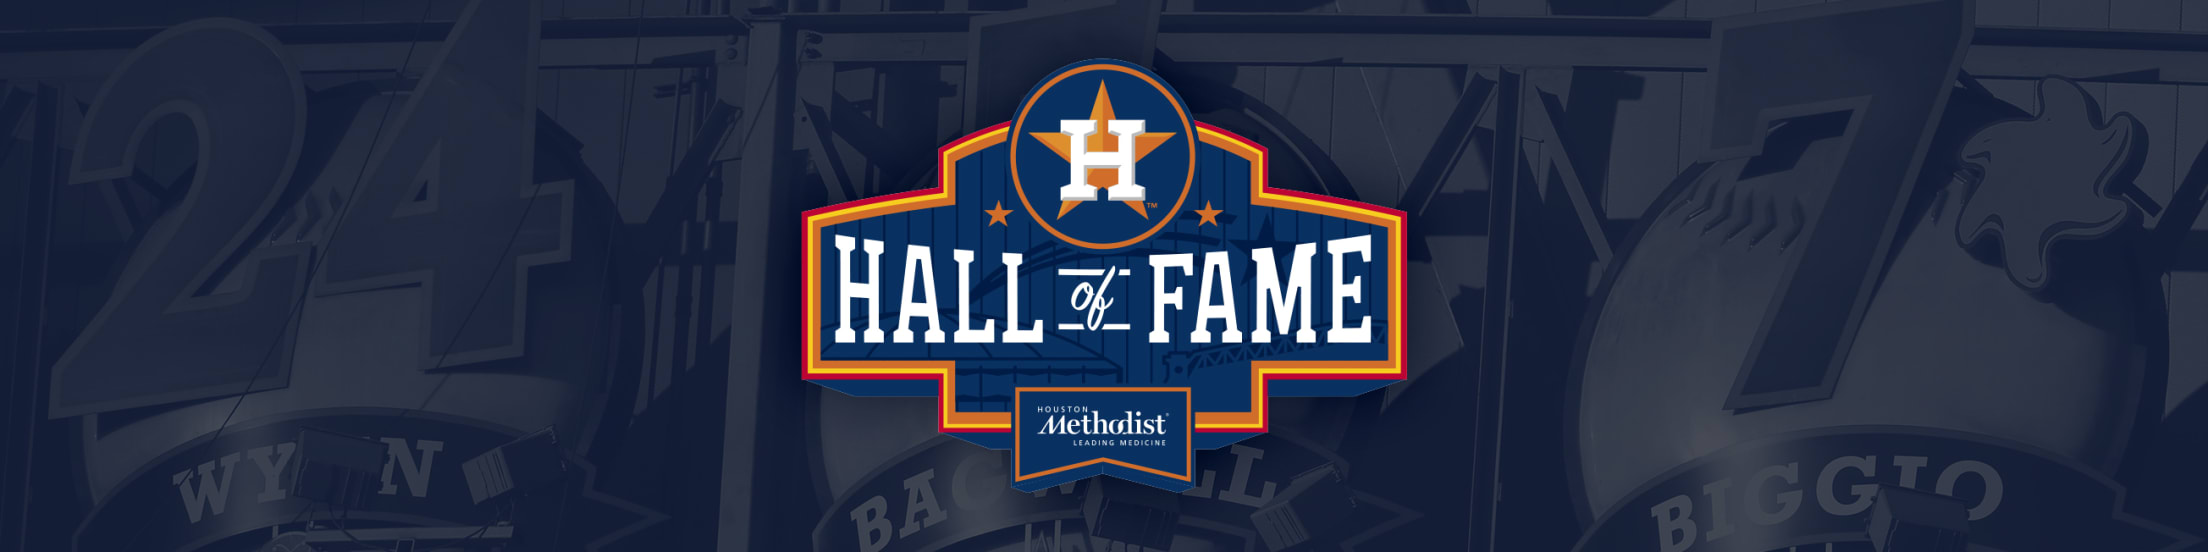 Puhl to be inducted into Astros Hall of Fame on Saturday